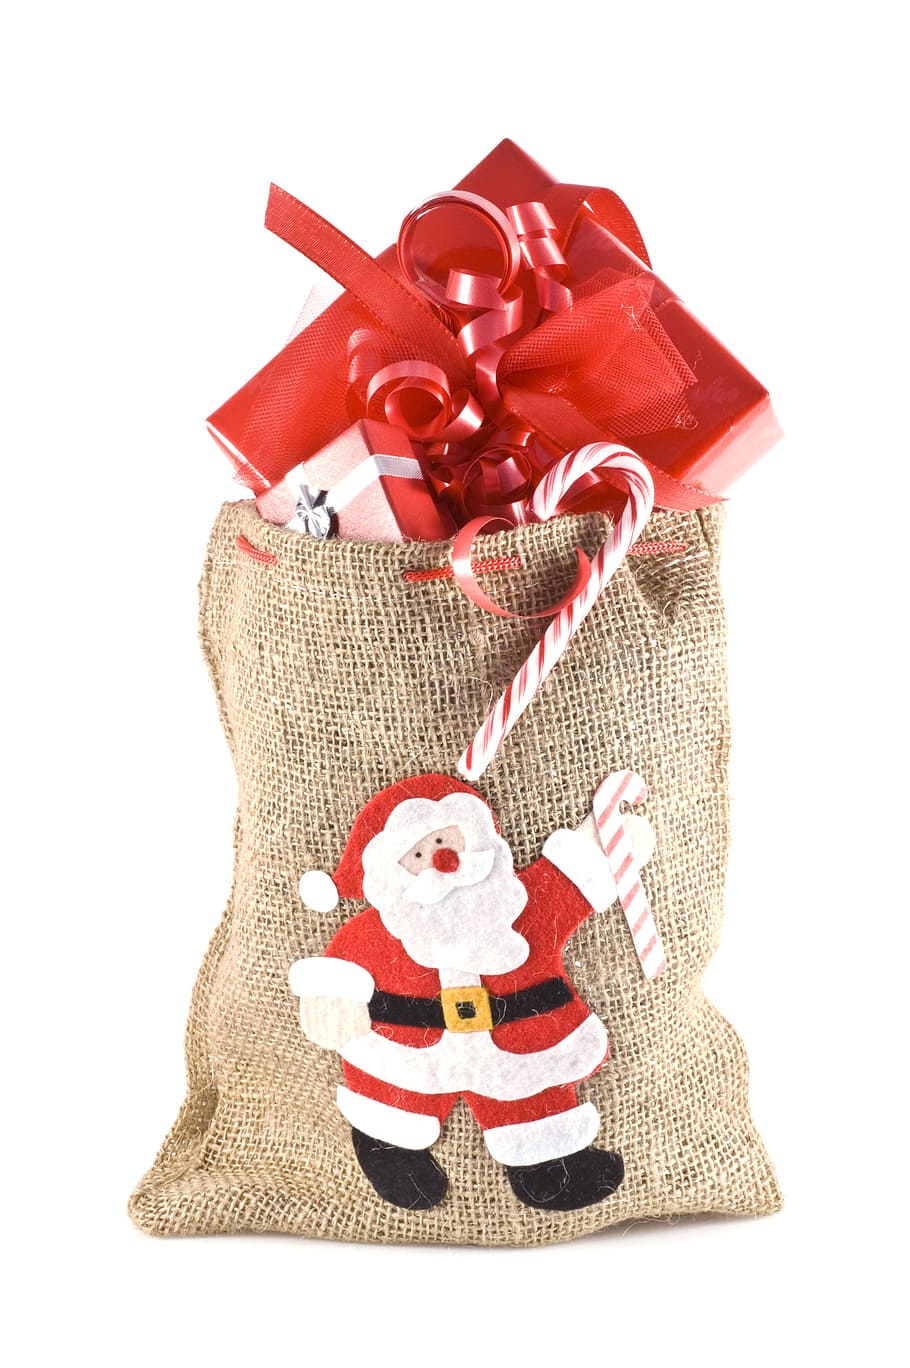 brown, drawstring pouch, red, gift box, christmas kids gifts old, pascuero, santa claus, studio shot, white background, holiday